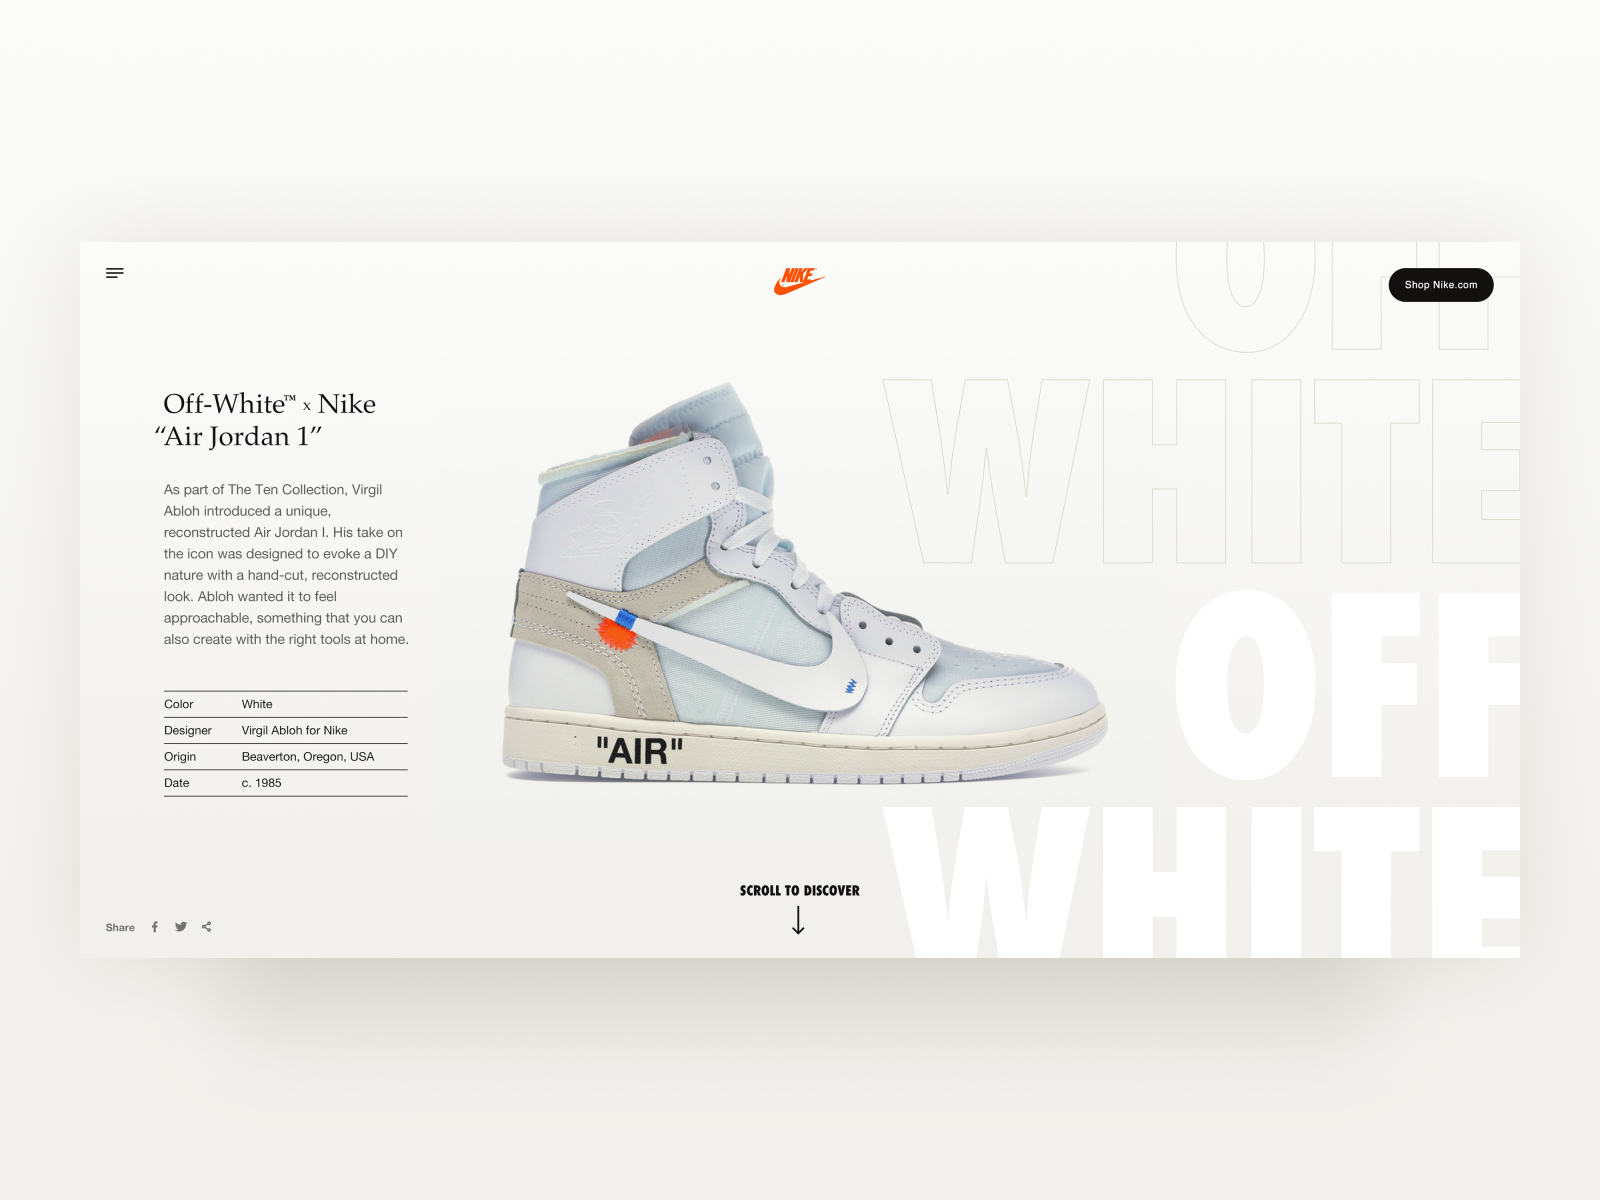 Nike x Off-White™ Landing Page by Eric Salcedo on Dribbble